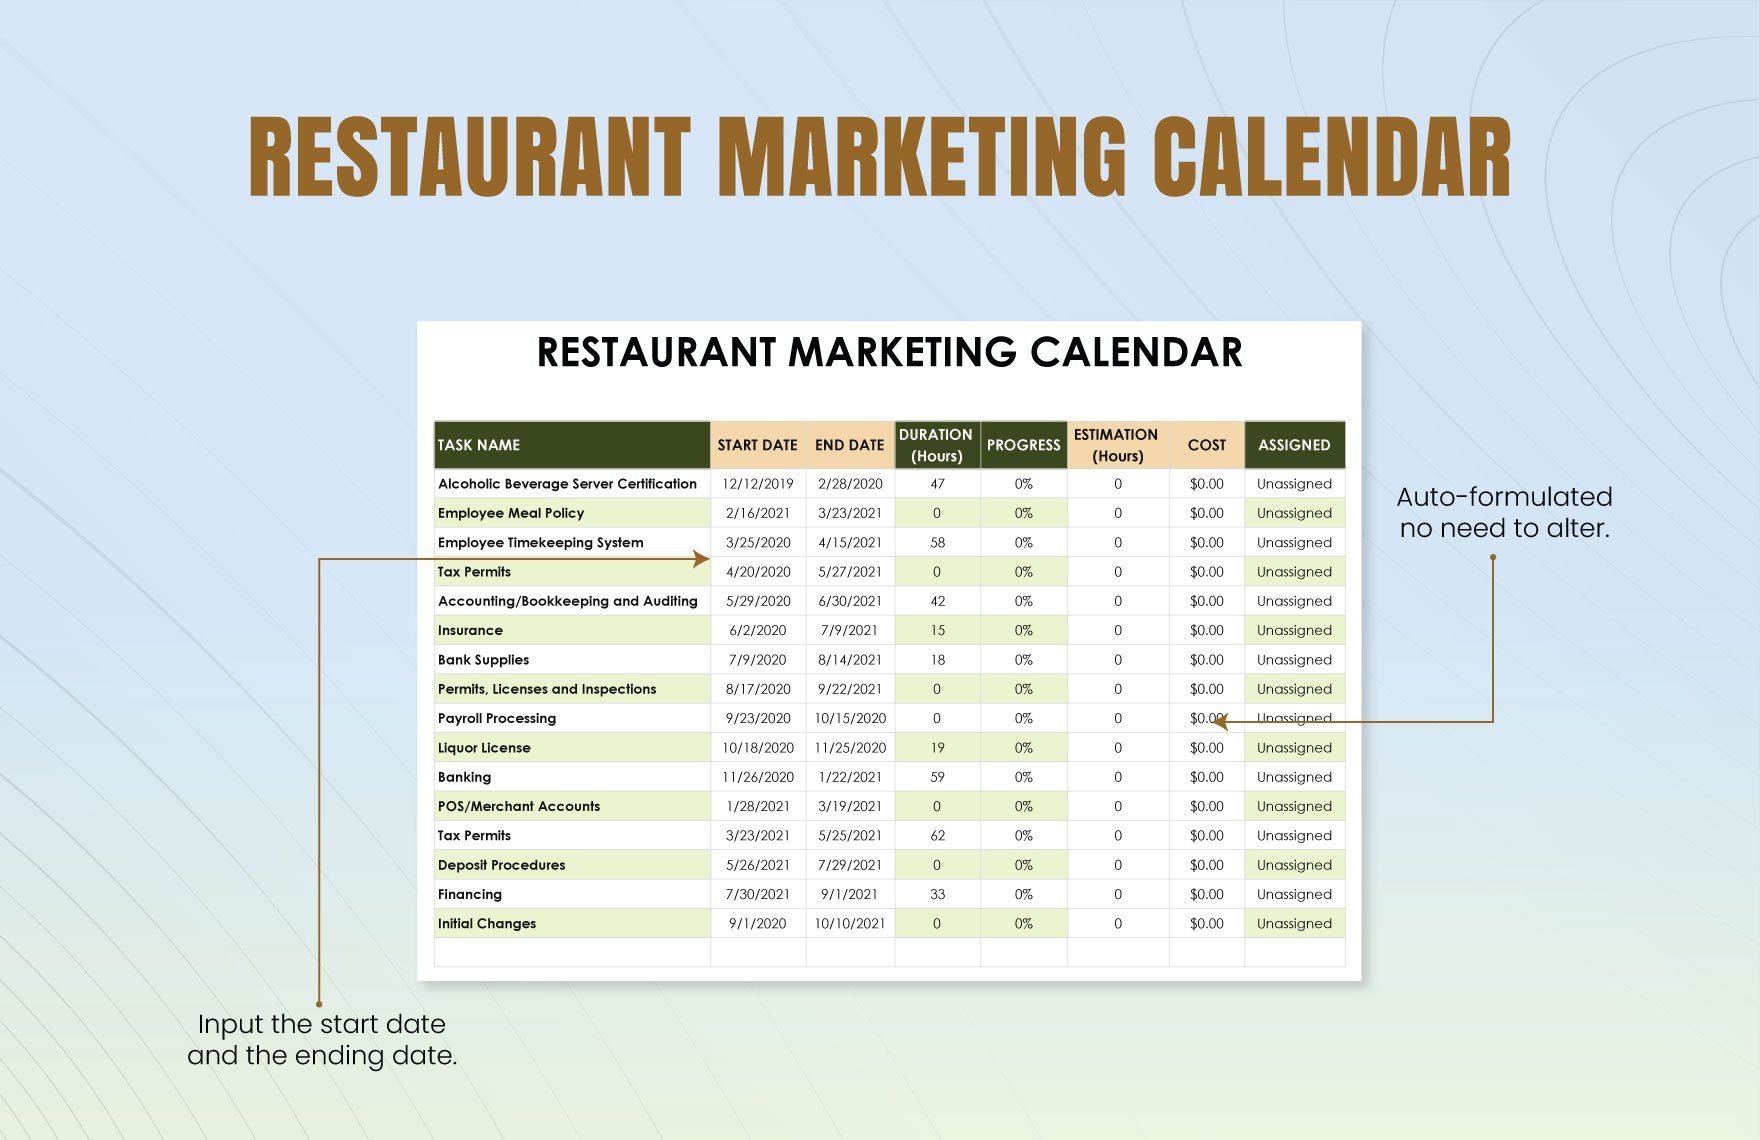 Restaurant Marketing Calendar Template in Pages, Numbers, Excel, Word